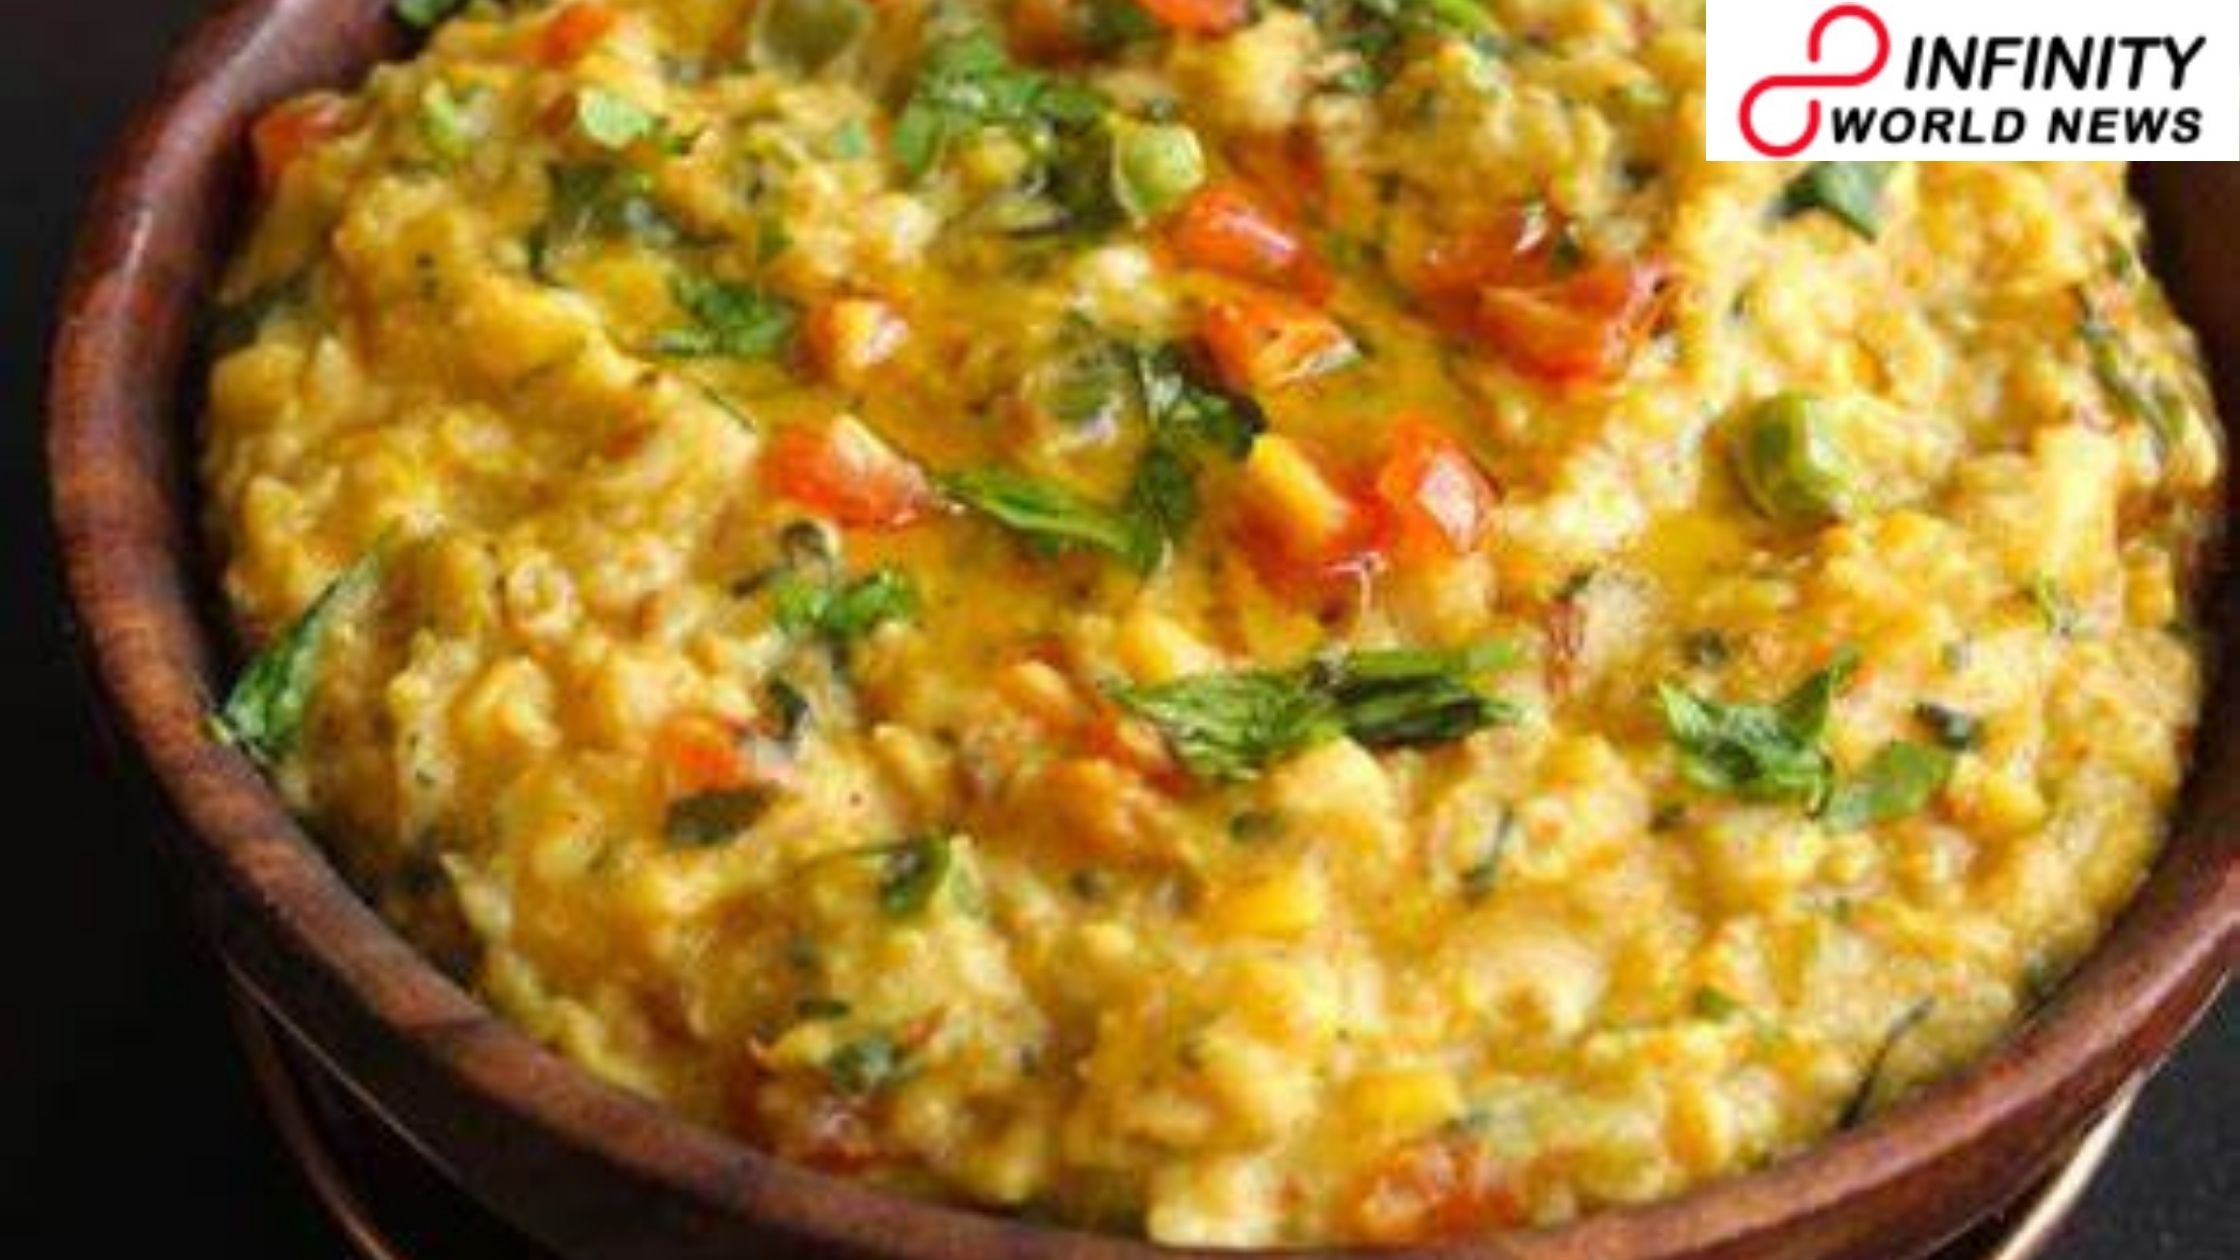 These four kinds of healthy khichdi made at home for kids or babies